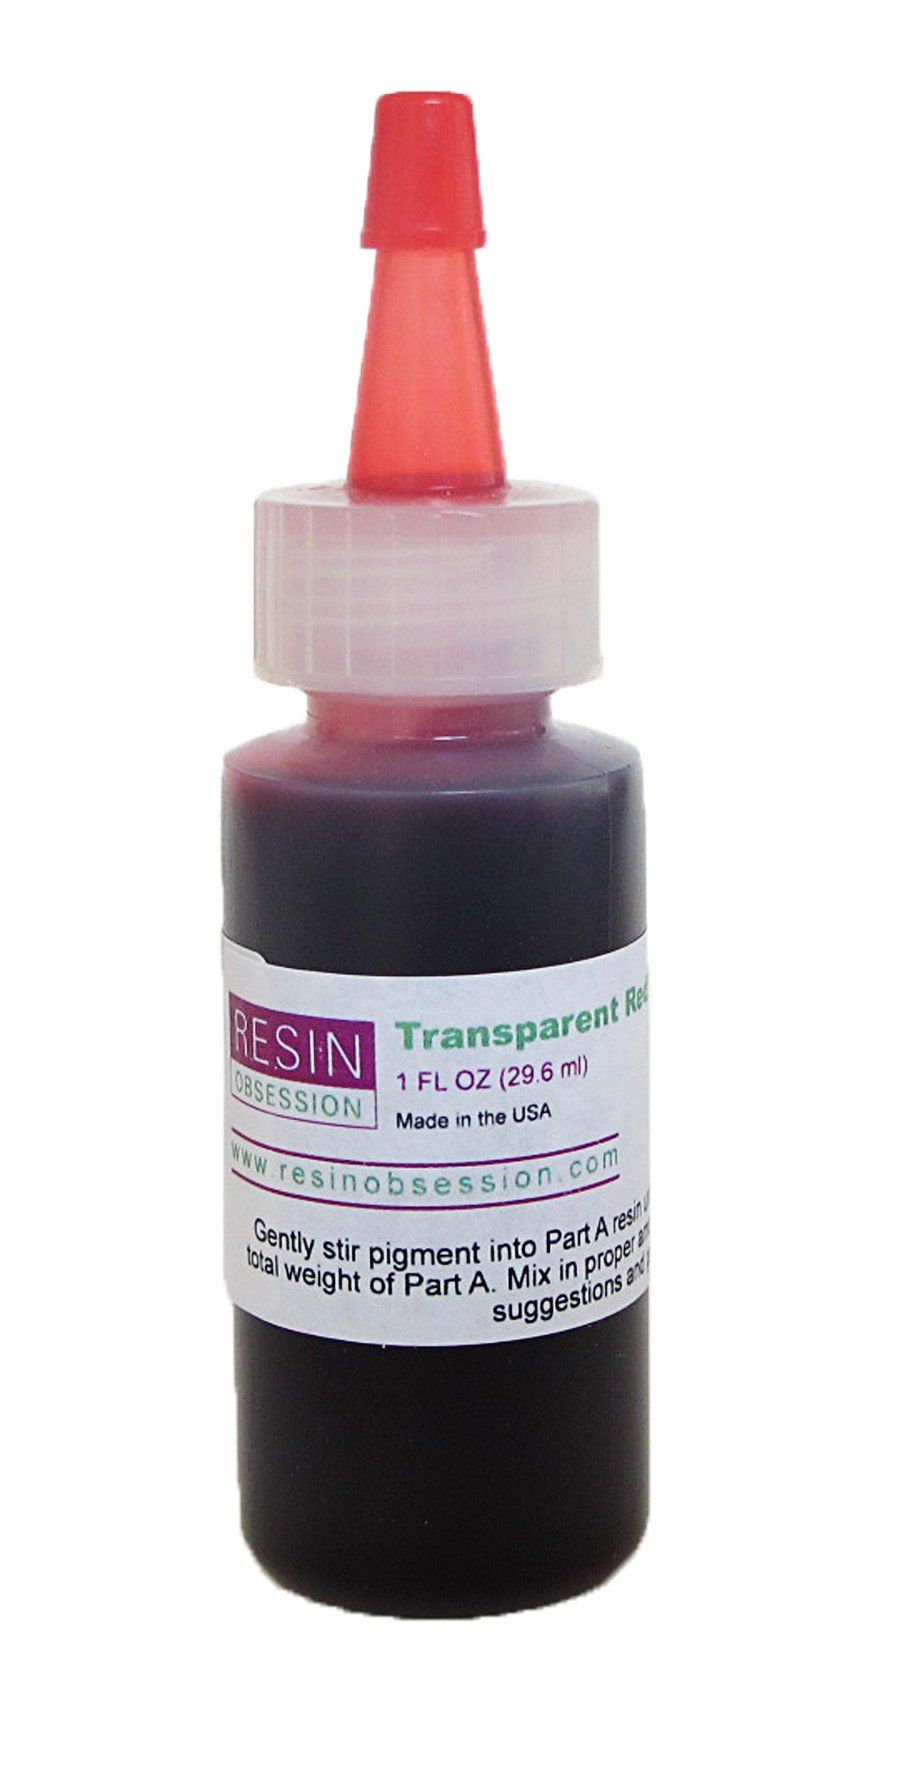 Mr. Resin Transparent Pigment Set- 12 Colors for Epoxy & UV Resin,Resin Coloring, Resin Jewelry Making - Concentrated UV Resin Colorant for Art, Paint